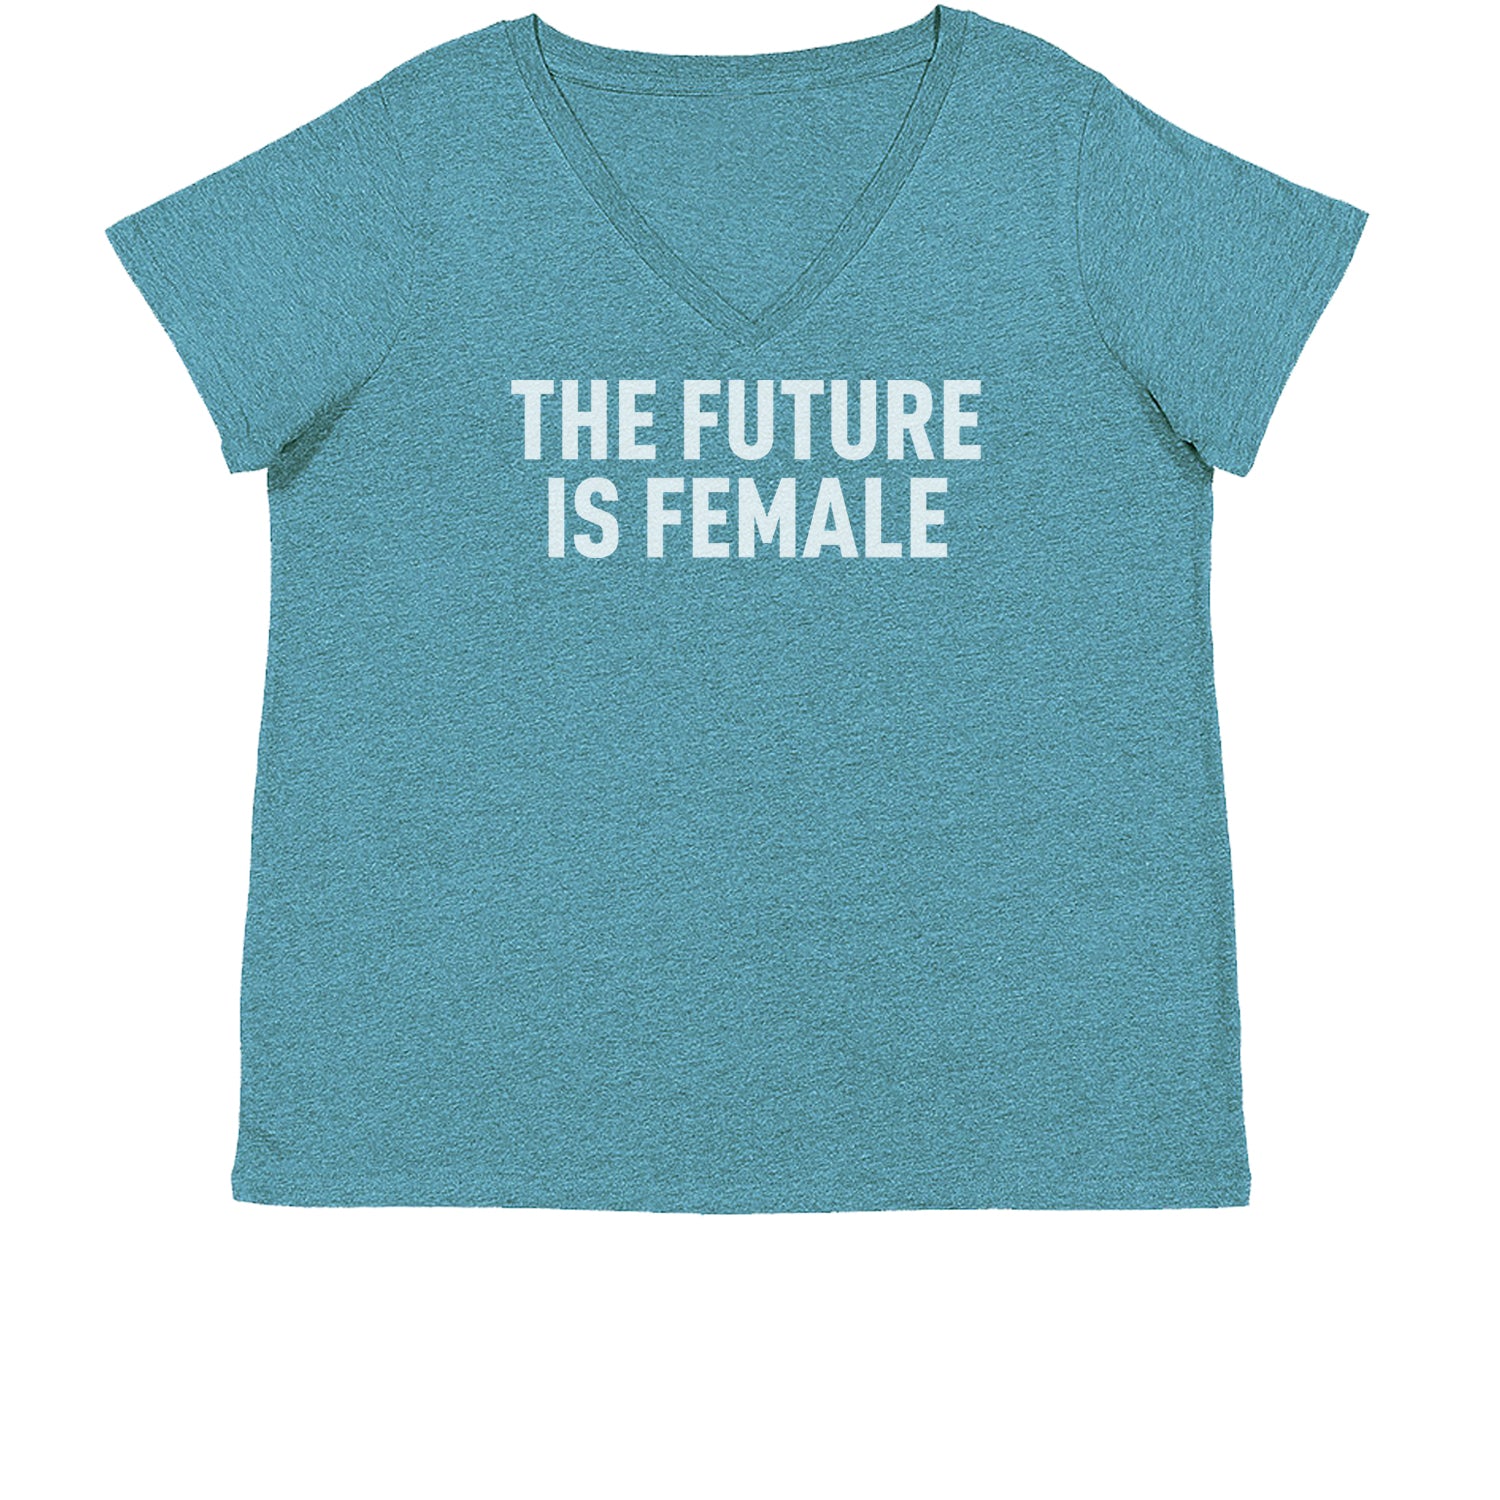 The Future Is Female Feminism Womens Plus Size V-Neck T-shirt female, feminism, feminist, femme, future, is, liberation, suffrage, the by Expression Tees